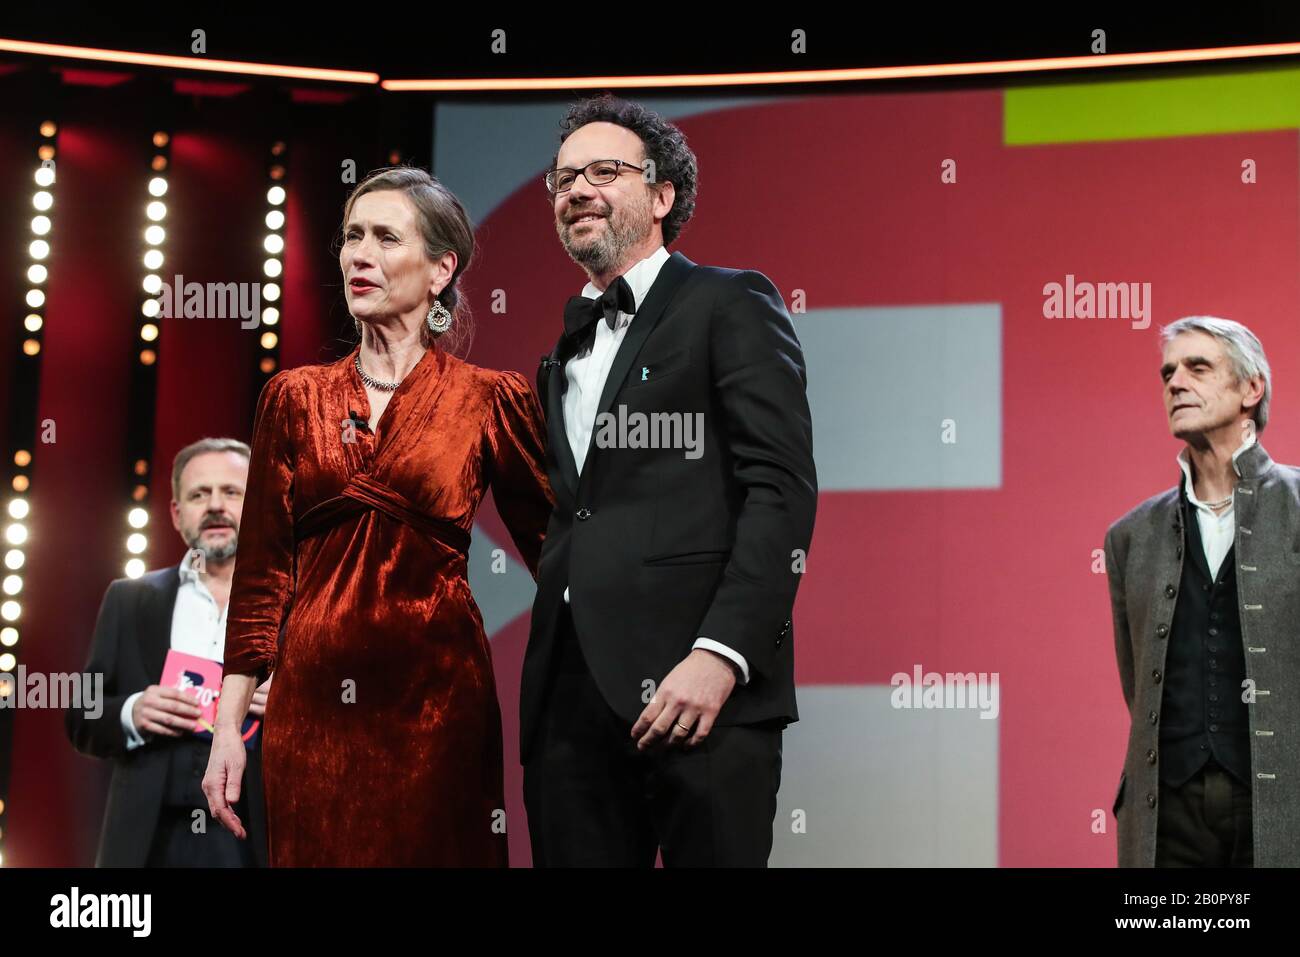 (200221) -- BERLIN, Feb. 21, 2020 (Xinhua) -- Berlinale Executive Director Mariette Rissenbeek (2nd L) and Berlinale Artistic Director Carlo Chatrian (2nd R) announce the opening of the 70th Berlin International Film Festival in Berlin, capital of Germany, Feb. 20, 2020. The 70th Berlin International Film Festival, or as it's more commonly known, the Berlinale, kicked off on Thursday with a literary drama 'My Salinger Year'.A total of 18 films have made it into this year's competition category and they will compete for the Golden Bear for best film, and other individual awards, the Silver Bear Stock Photo